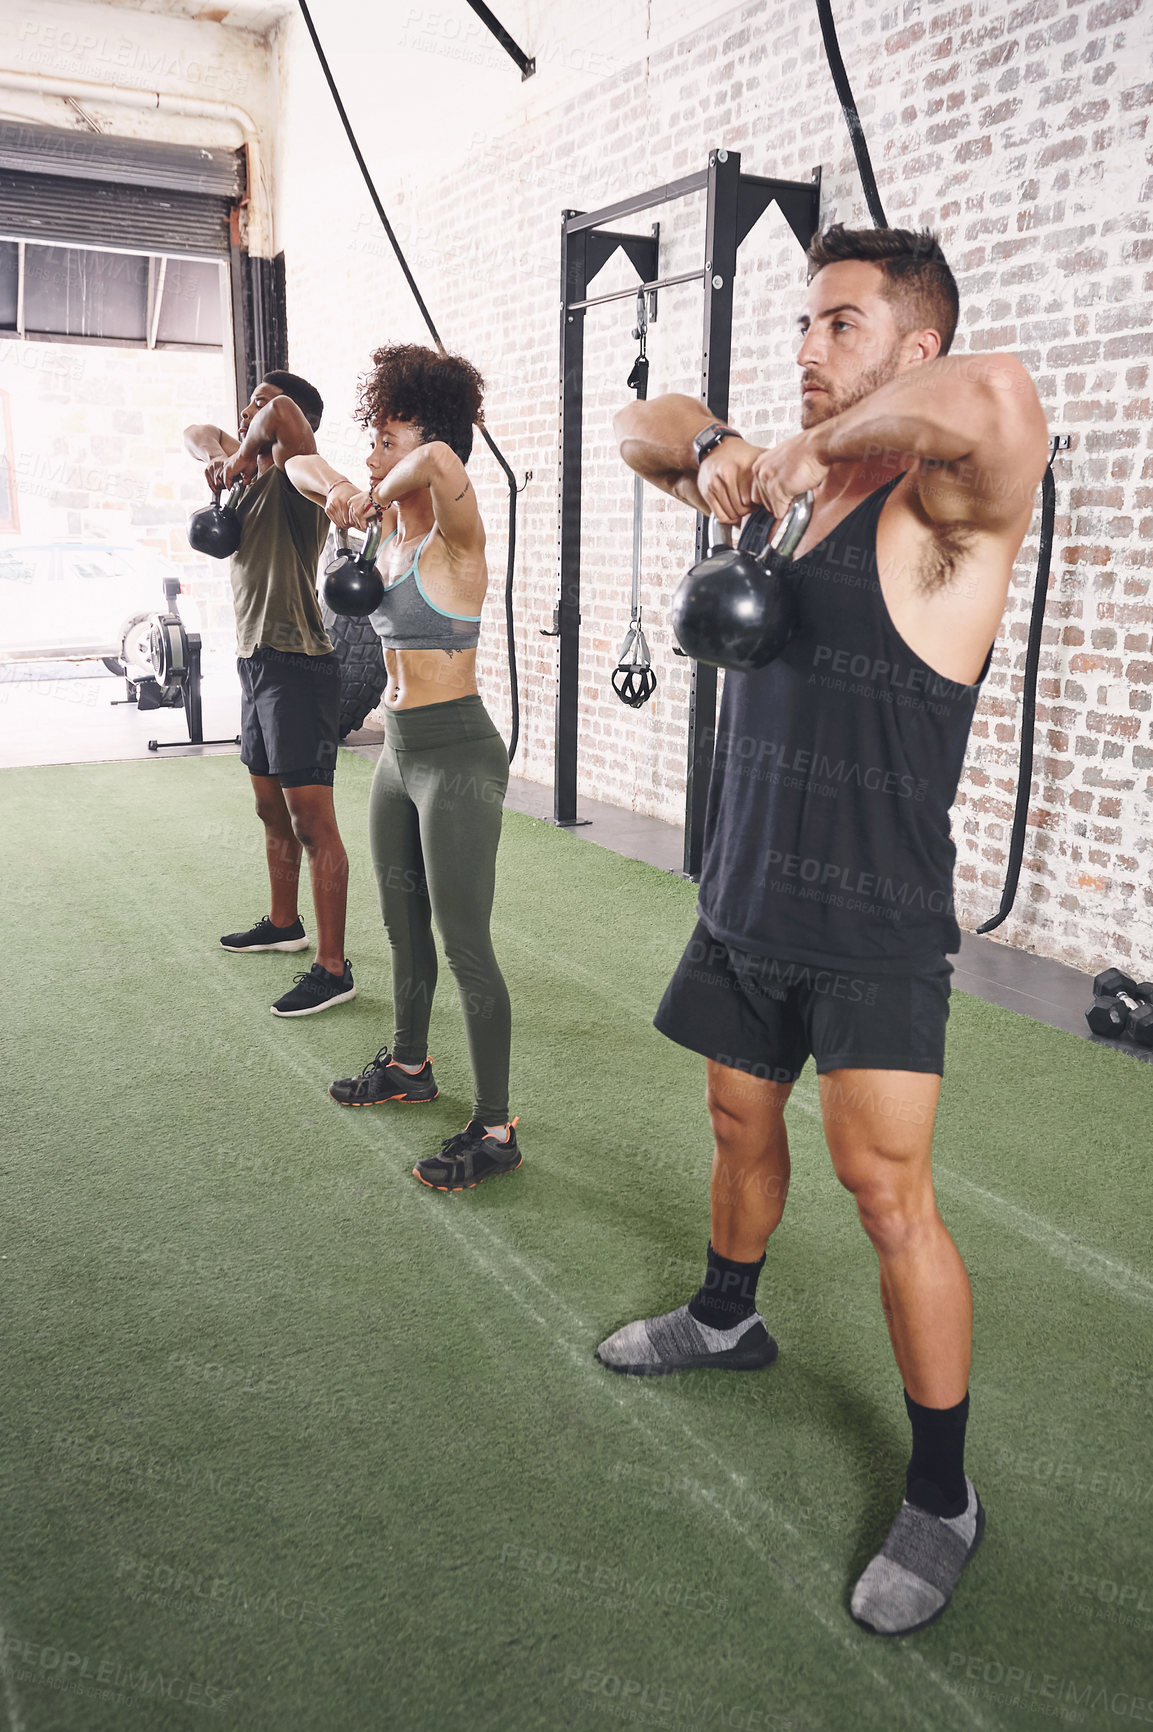 Buy stock photo Shot of a fitness group using kettlebells while working out at the gym